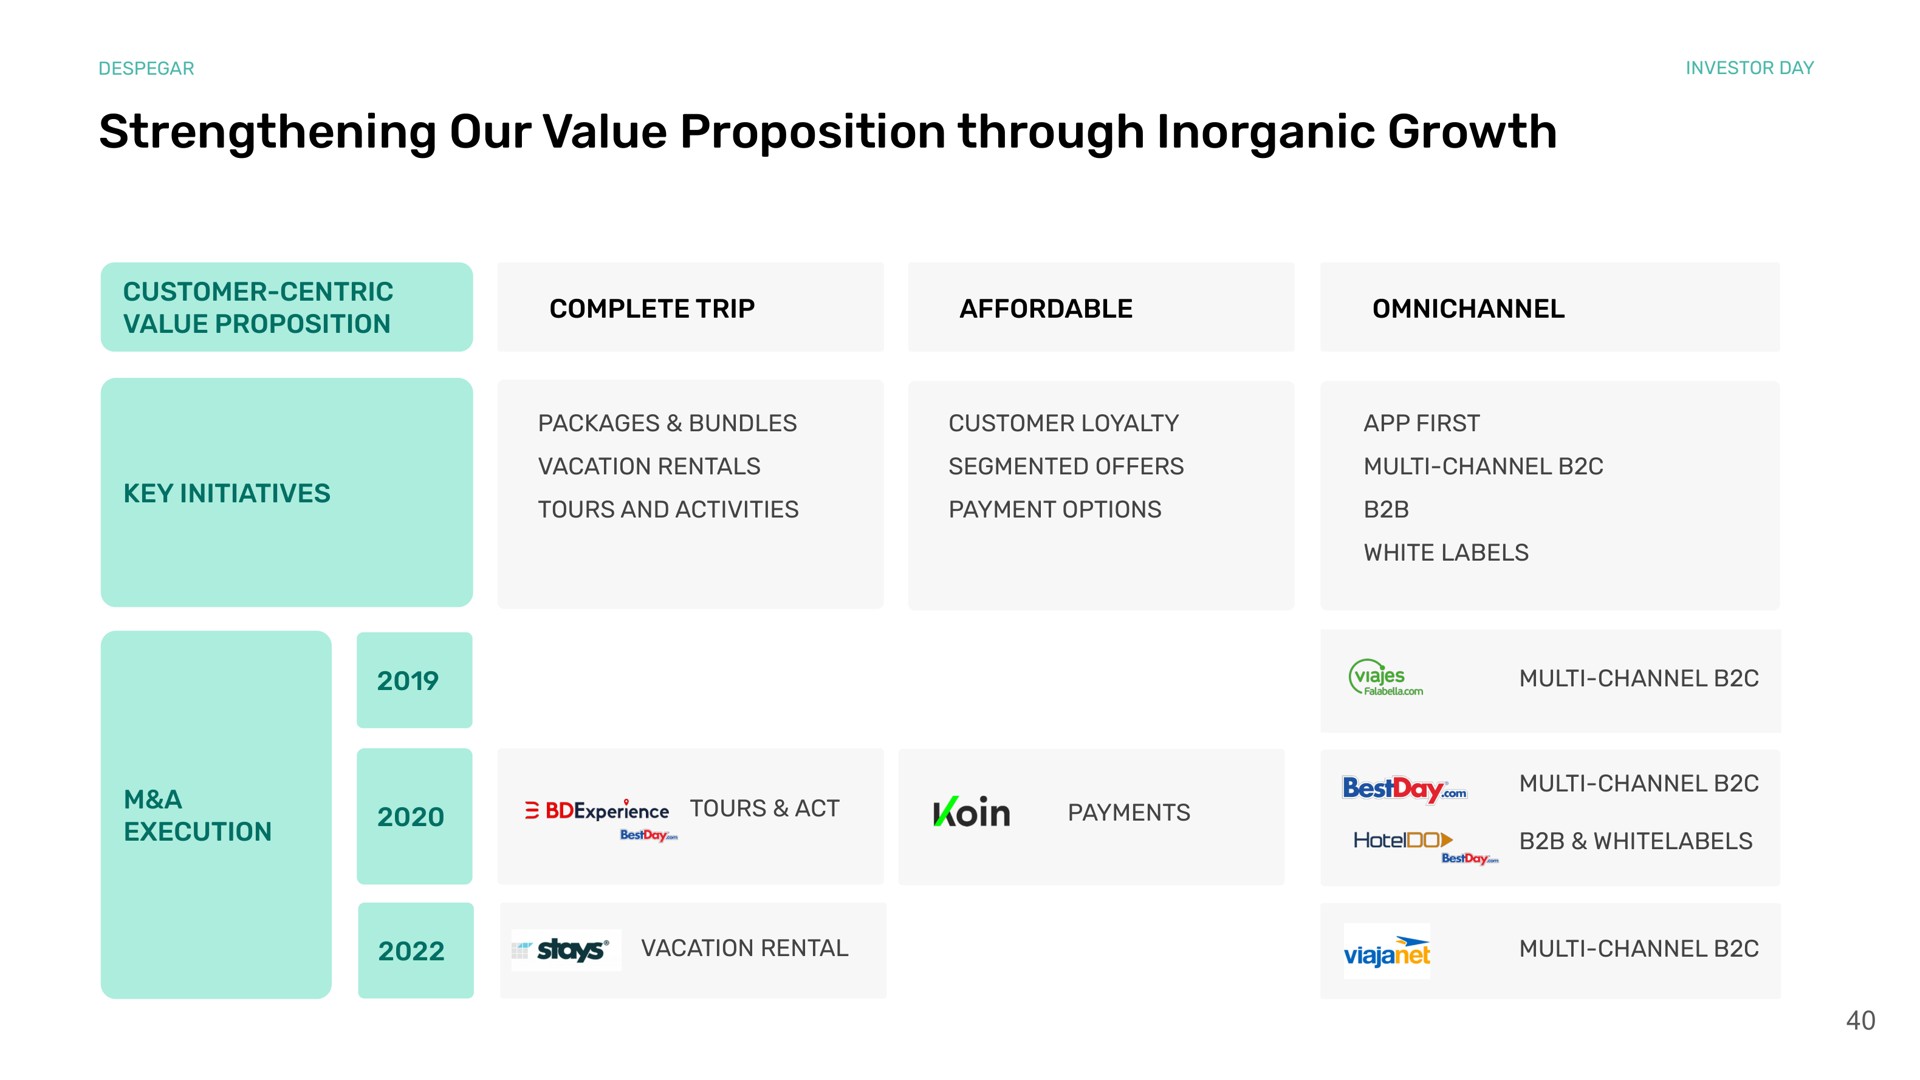 customer centric value proposition strengthening our value proposition through inorganic growth customer centric value proposition complete trip affordable key initiatives a execution | Despegar